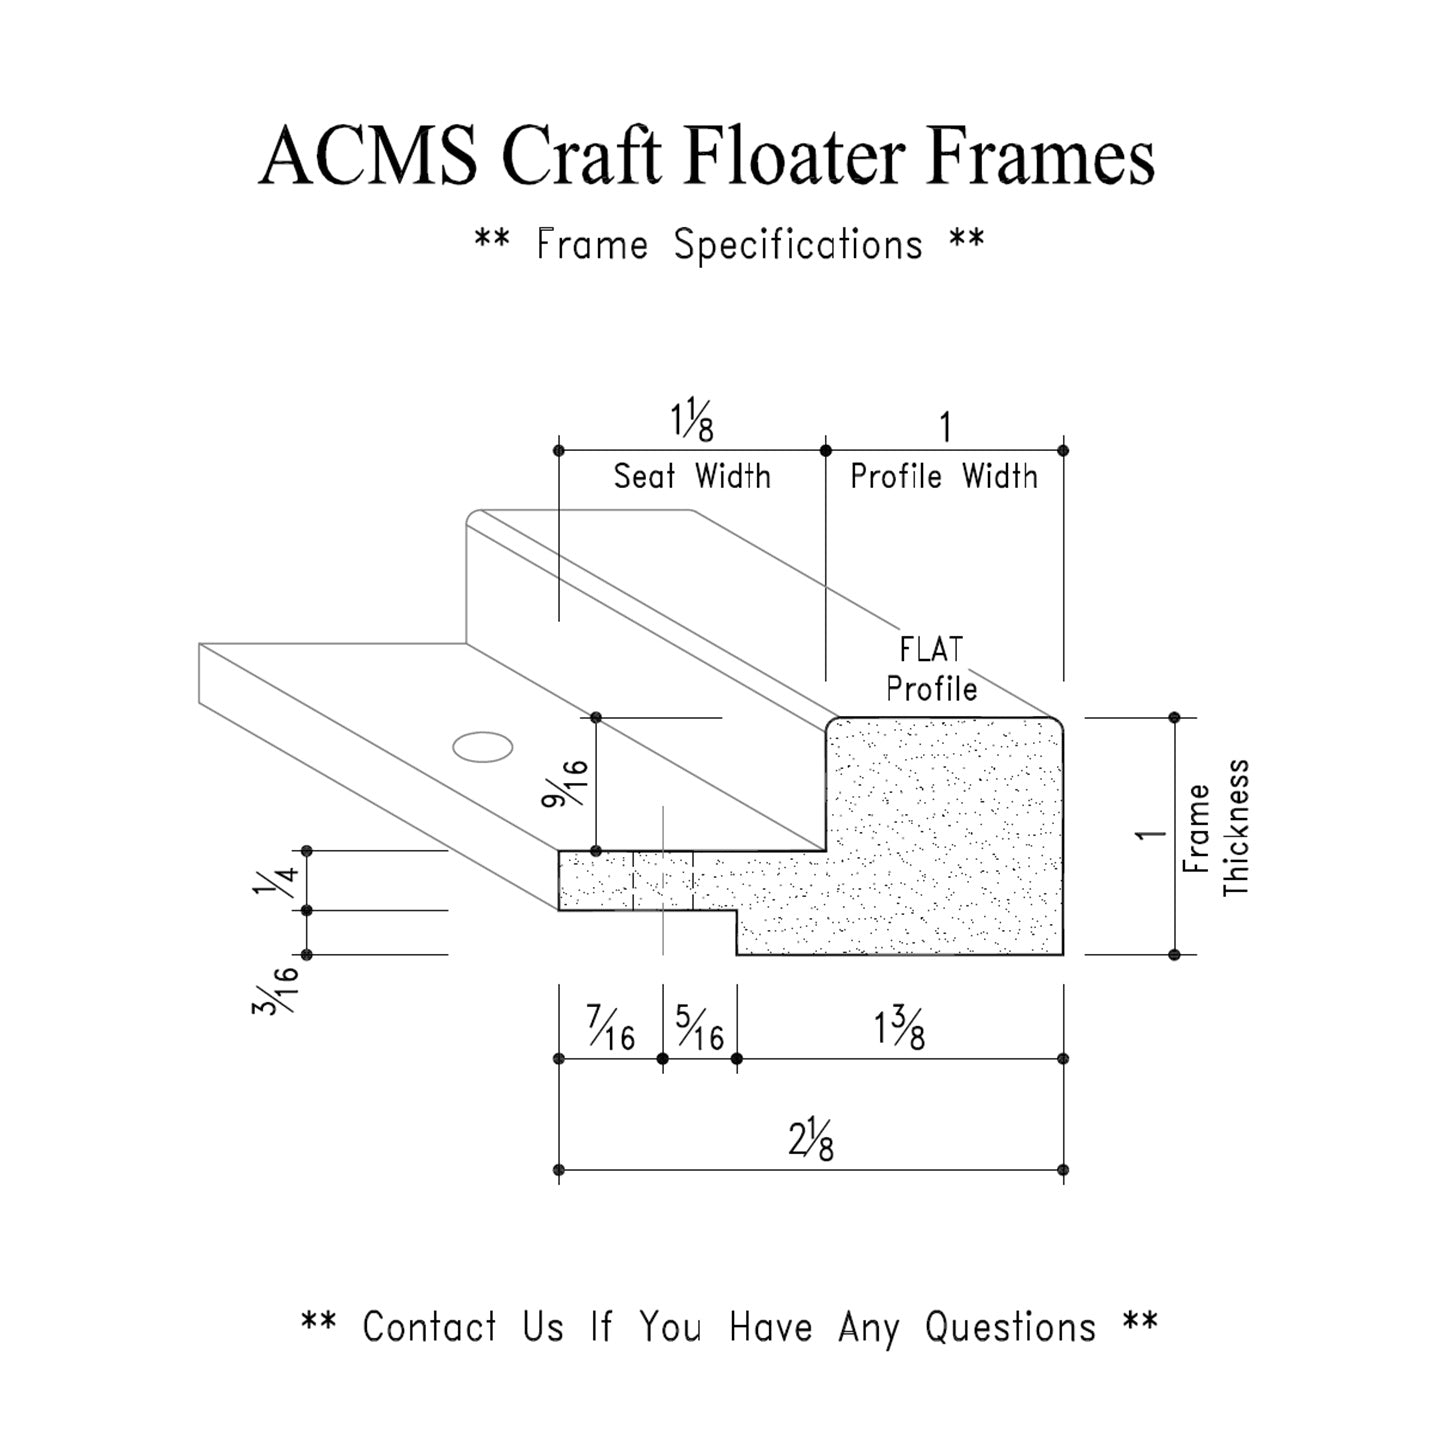 ACMS Soft Square Craft Floater Frame - For 1/2" Thick Artwork - Profile 1" FLAT